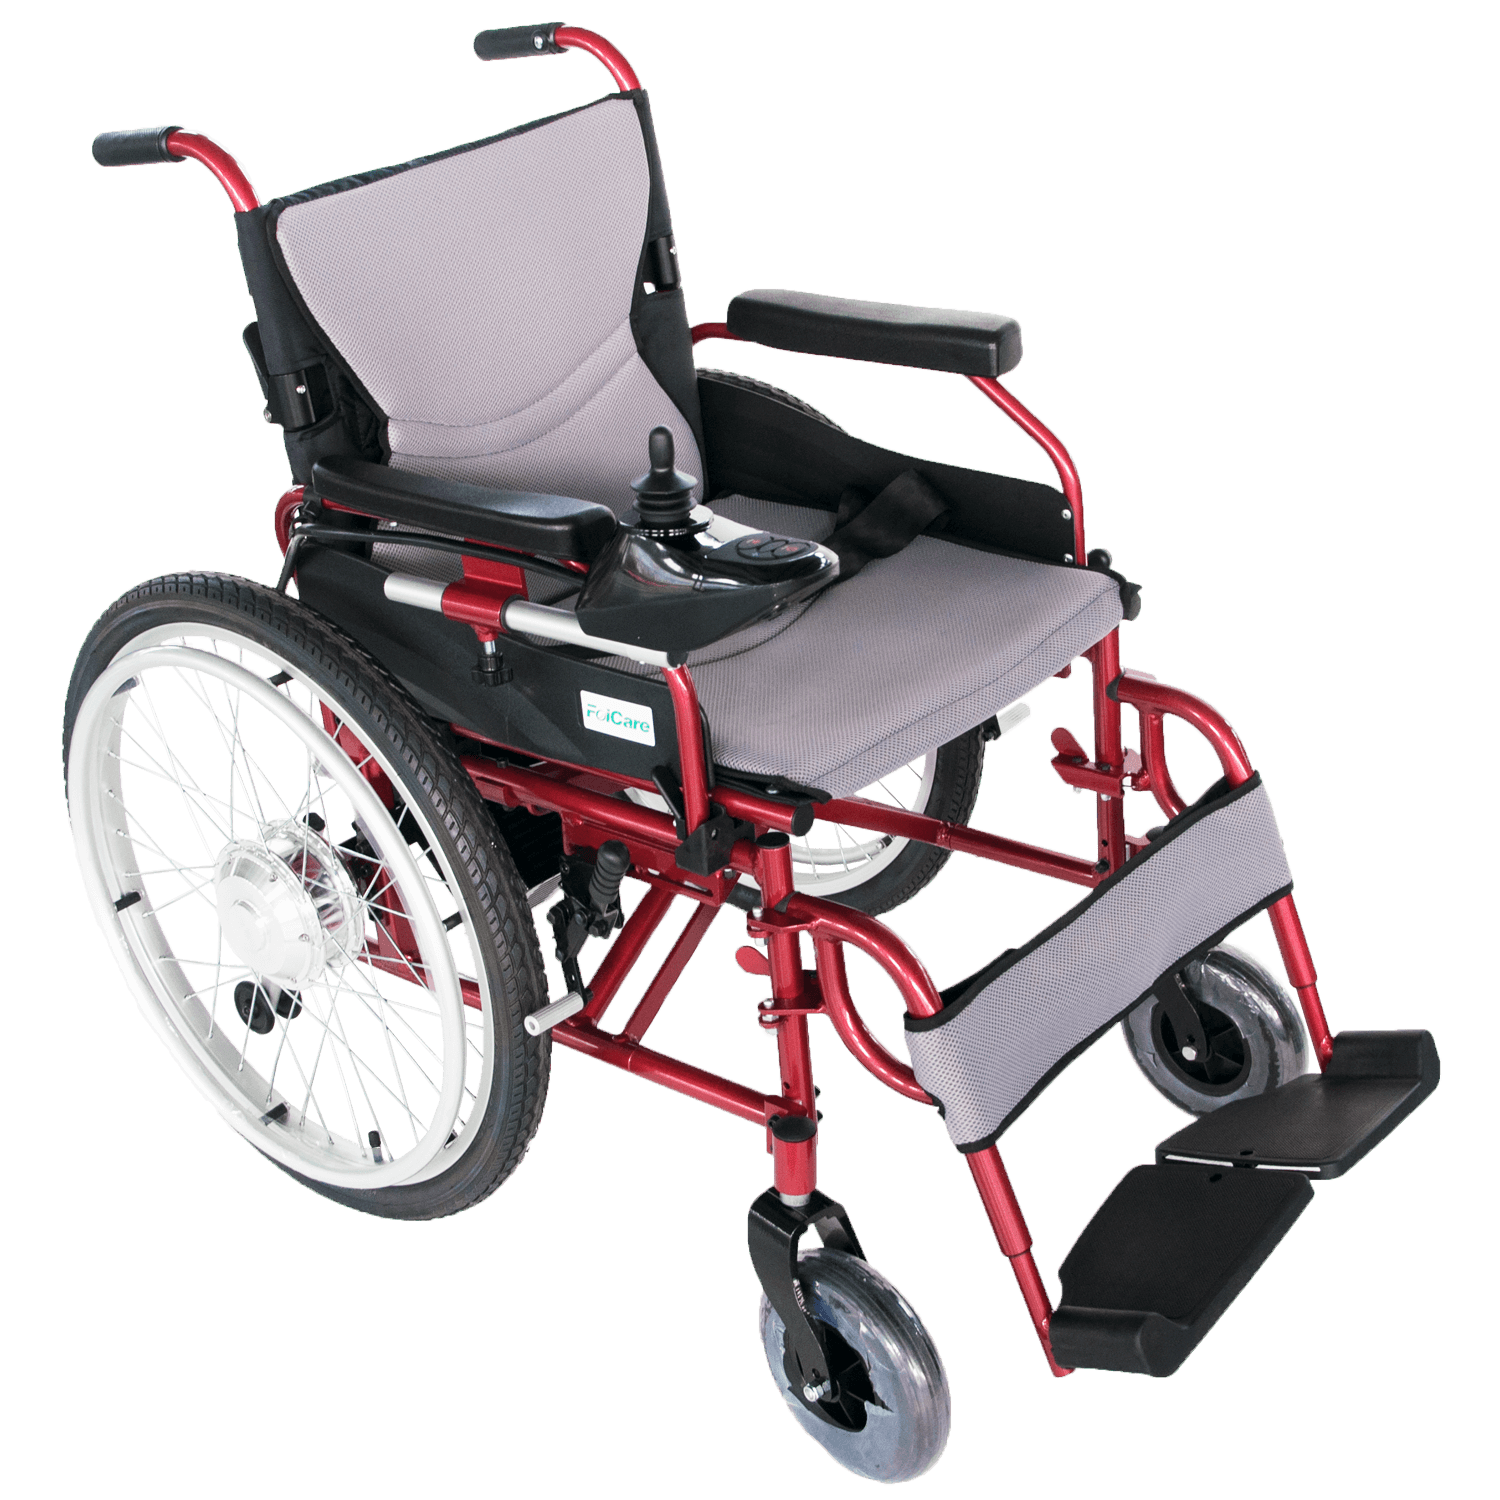 Multi Function Folding Power Electric Wheel Chair For Adults From China Manufacturer Foicare